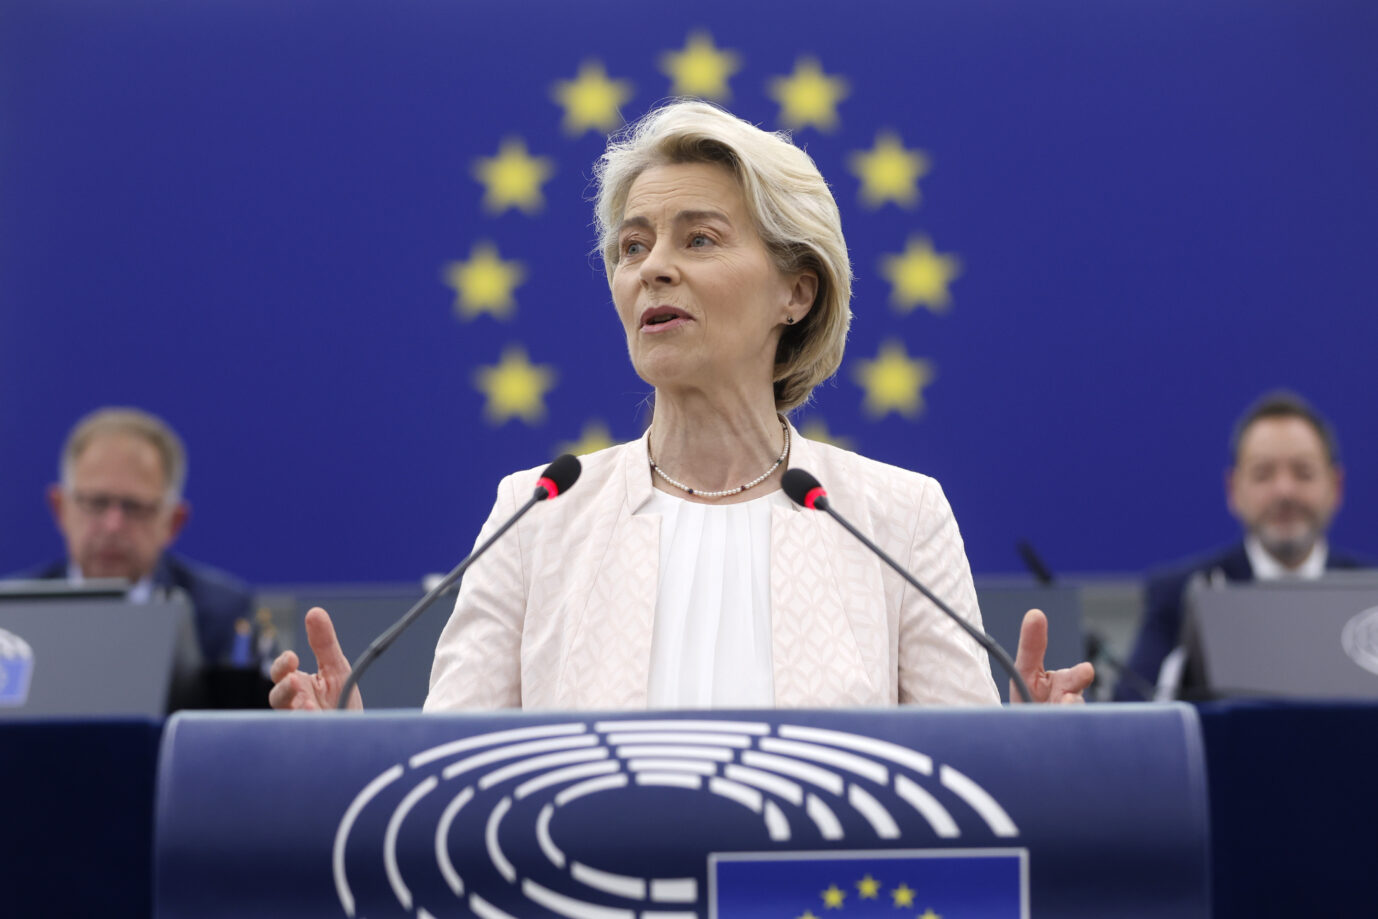 European Commission President Ursula von der Leyen addresses the plenary at the European Parliament in Strasbourg, eastern France, Thursday, July 18, 2024. Ursula von der Leyen was making her final pitch Thursday to lawmakers at the European Parliament ahead of a vote on whether to grant her a second five-year term as president of the European Union's executive commission. (AP Photo/Jean-Francois Badias)